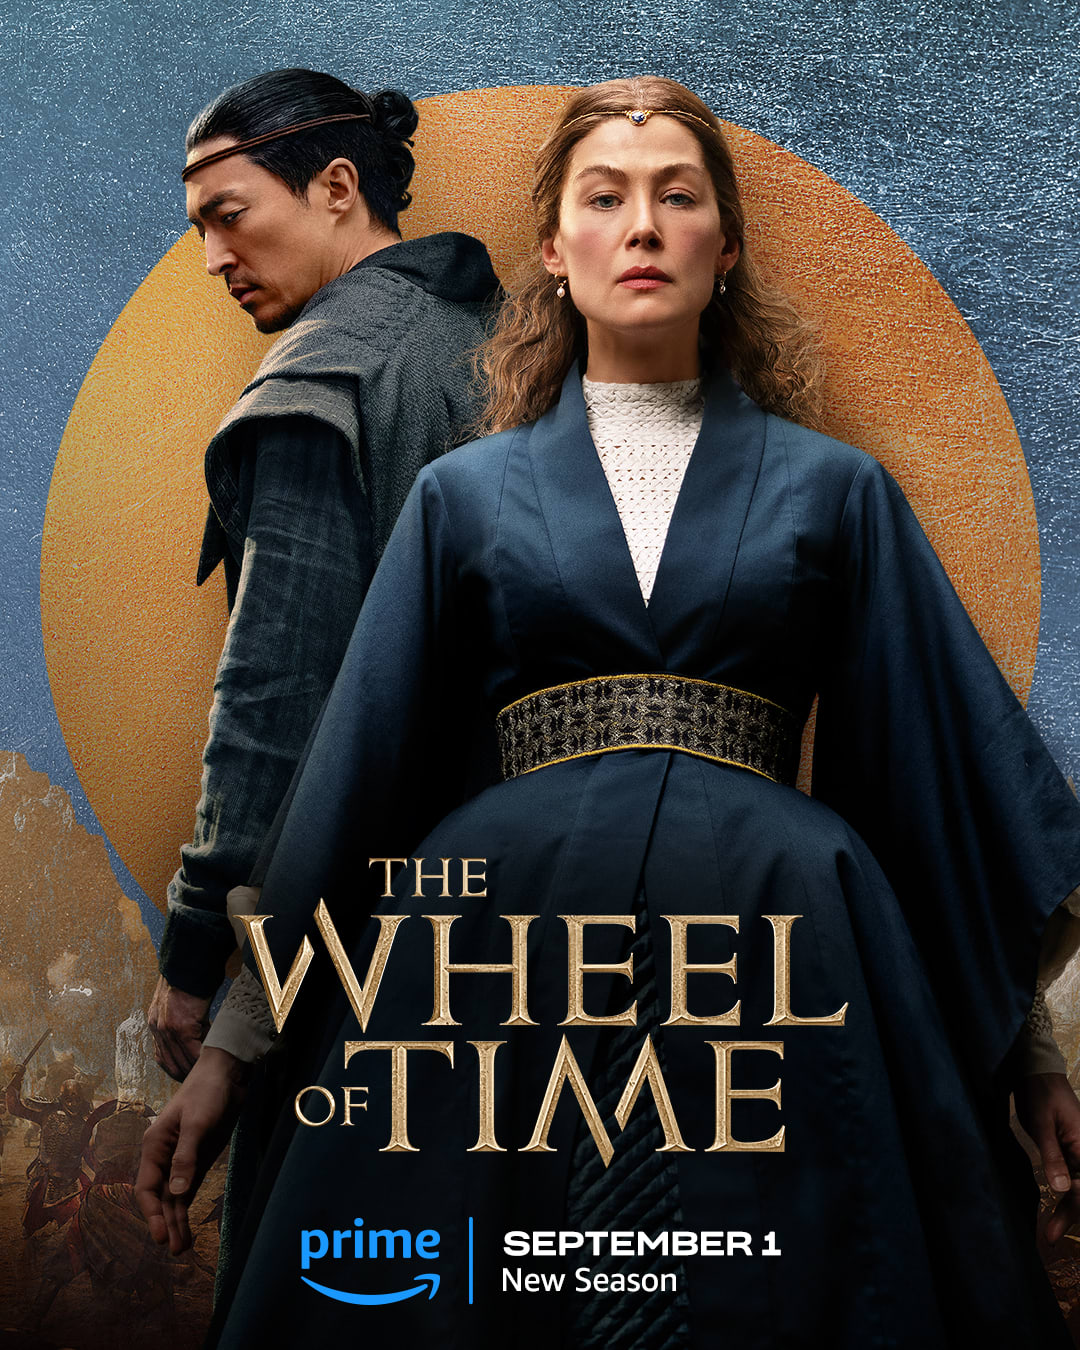 assets/img/movie/The Wheel of Time 2023 S02 kjdhf.jpeg 9xmovies